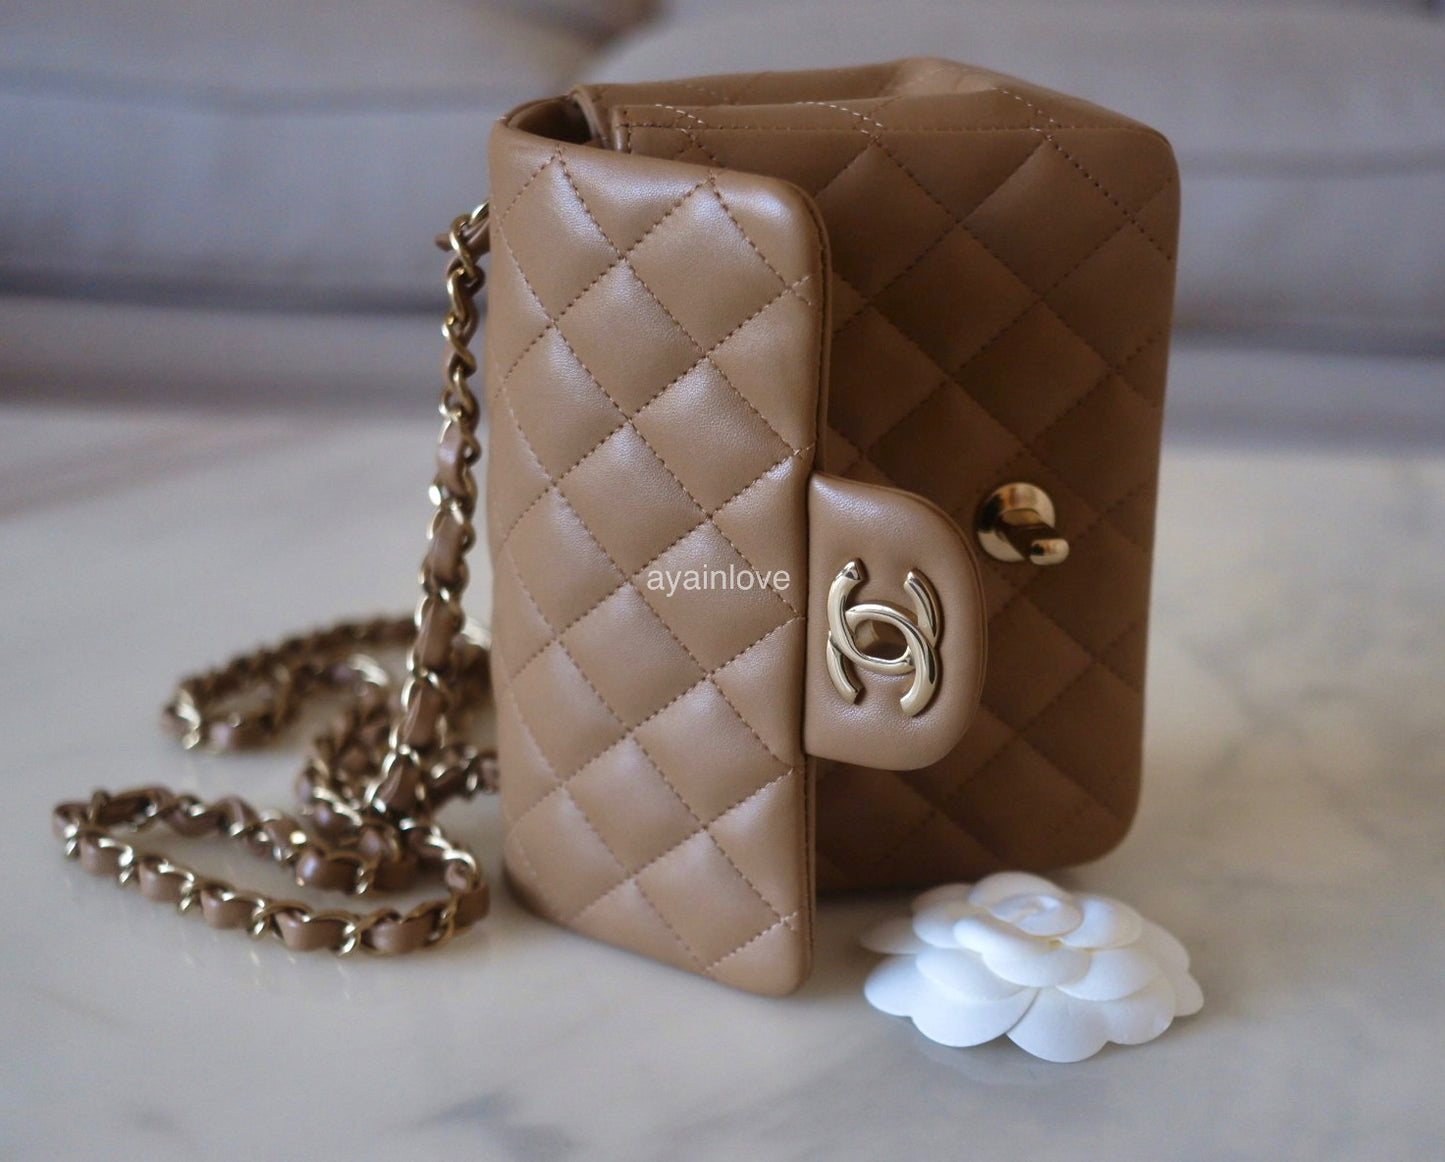 CHANEL 22B Beige Taupe Lamb Skin Classic Quilted Square Mini Flap Bag Light Gold Hardware